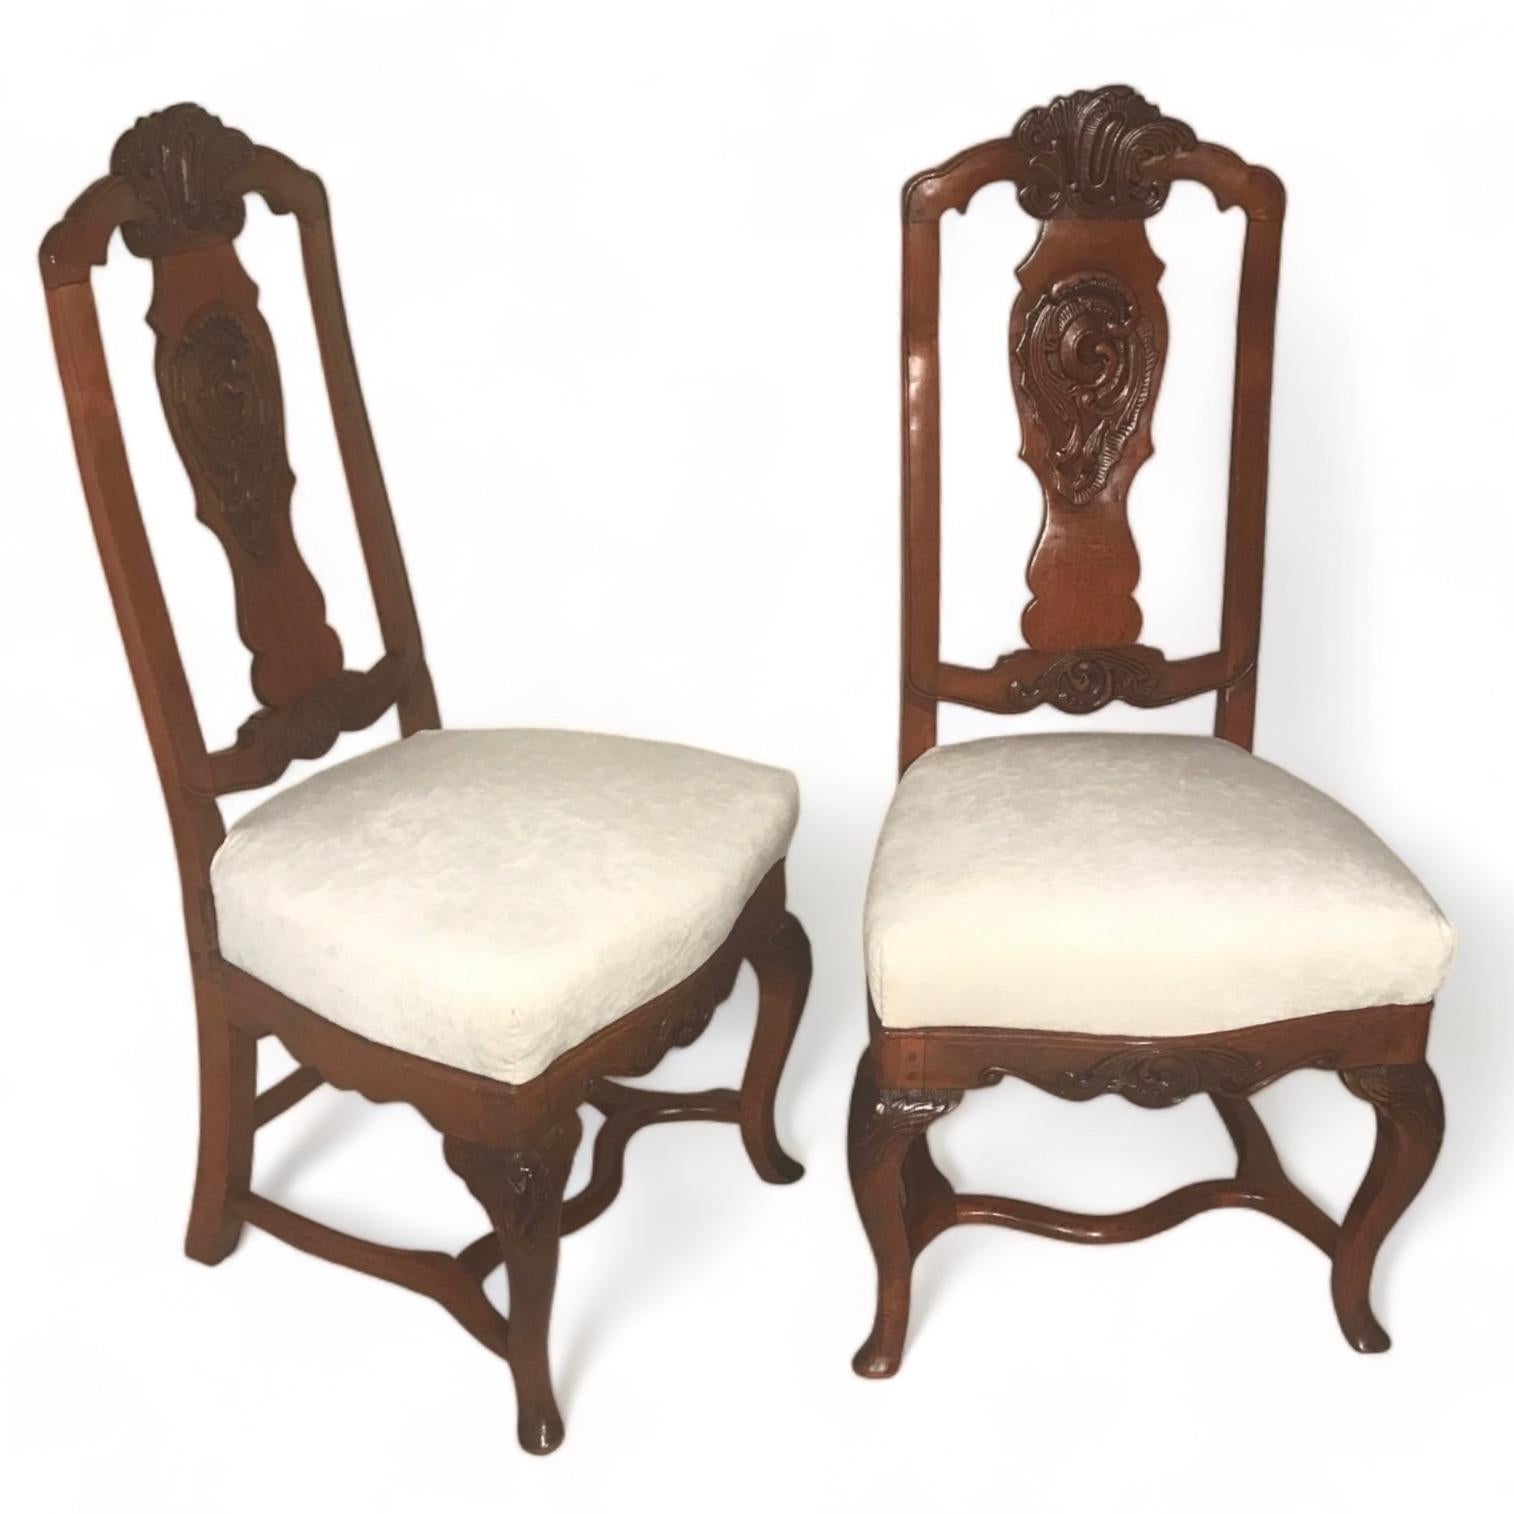 This set of six original Baroque chairs dates back to around 1750-60 and comes from southern Germany. These original antique Baroque chairs are a rare find. They have a beautifully carved decor with rocailles and acanthus leaves on the high